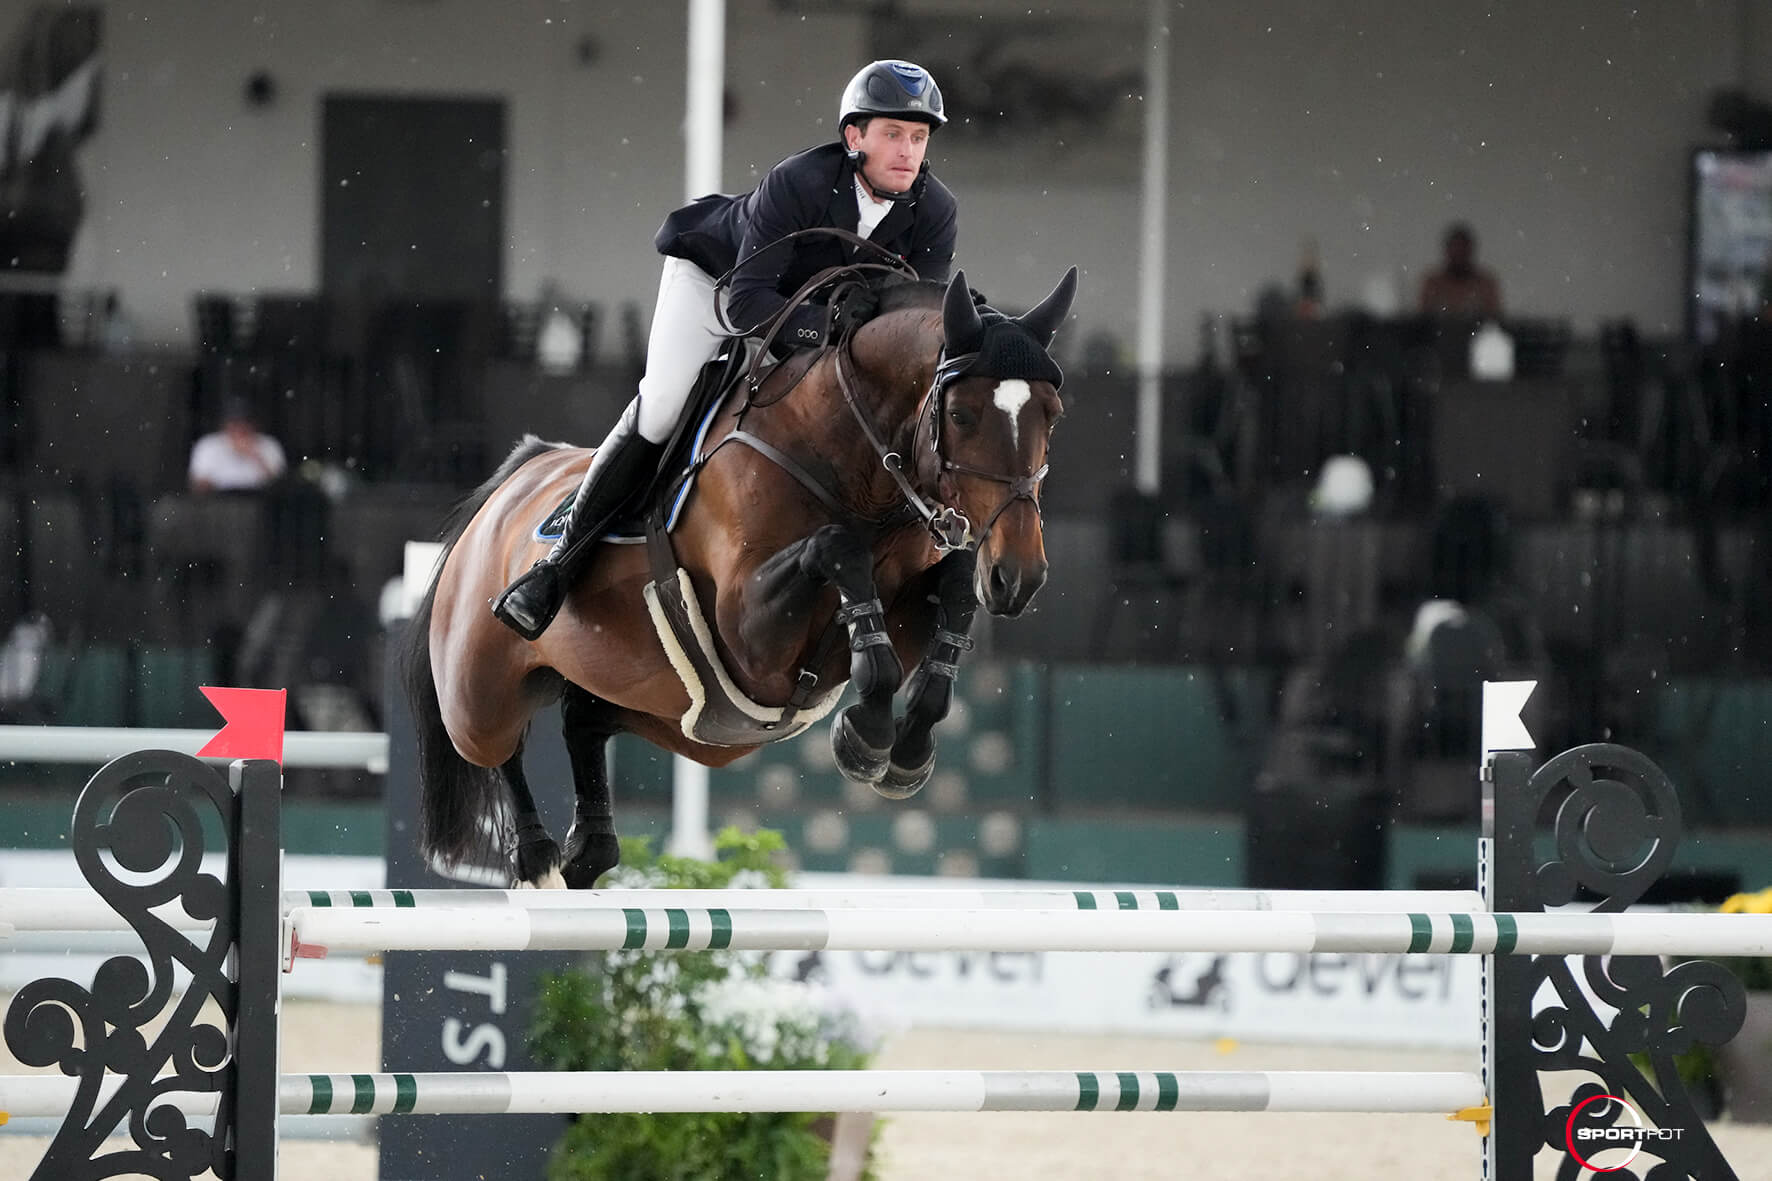 Darragh Kenny leads Cicomein VDL to victory in 4* 1.45m class of St Tropez